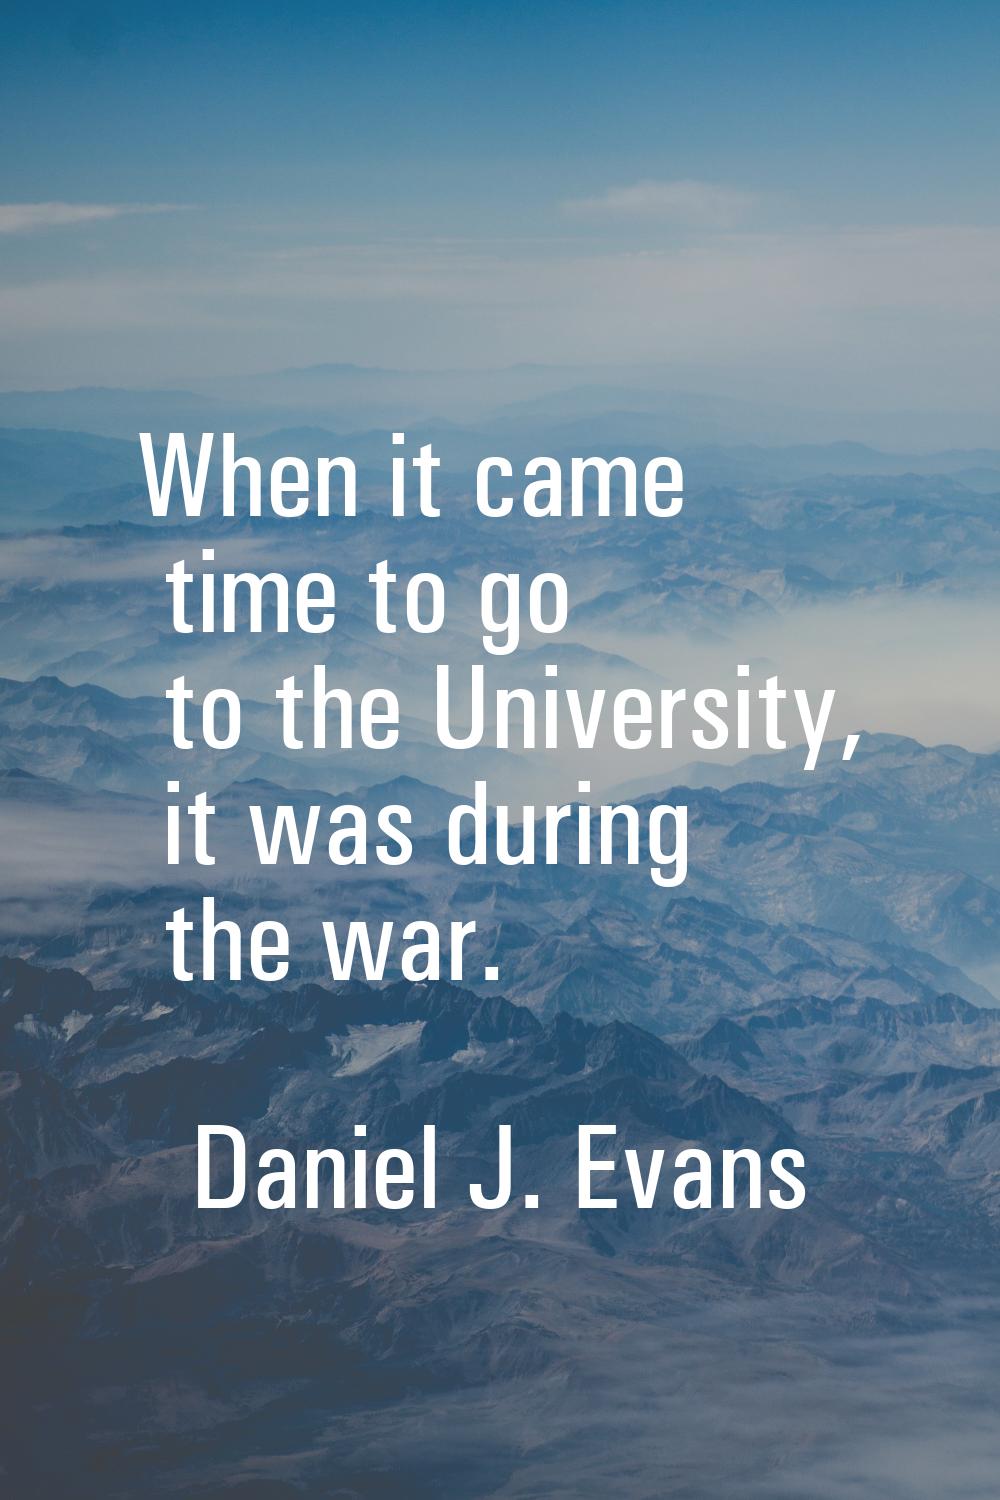 When it came time to go to the University, it was during the war.